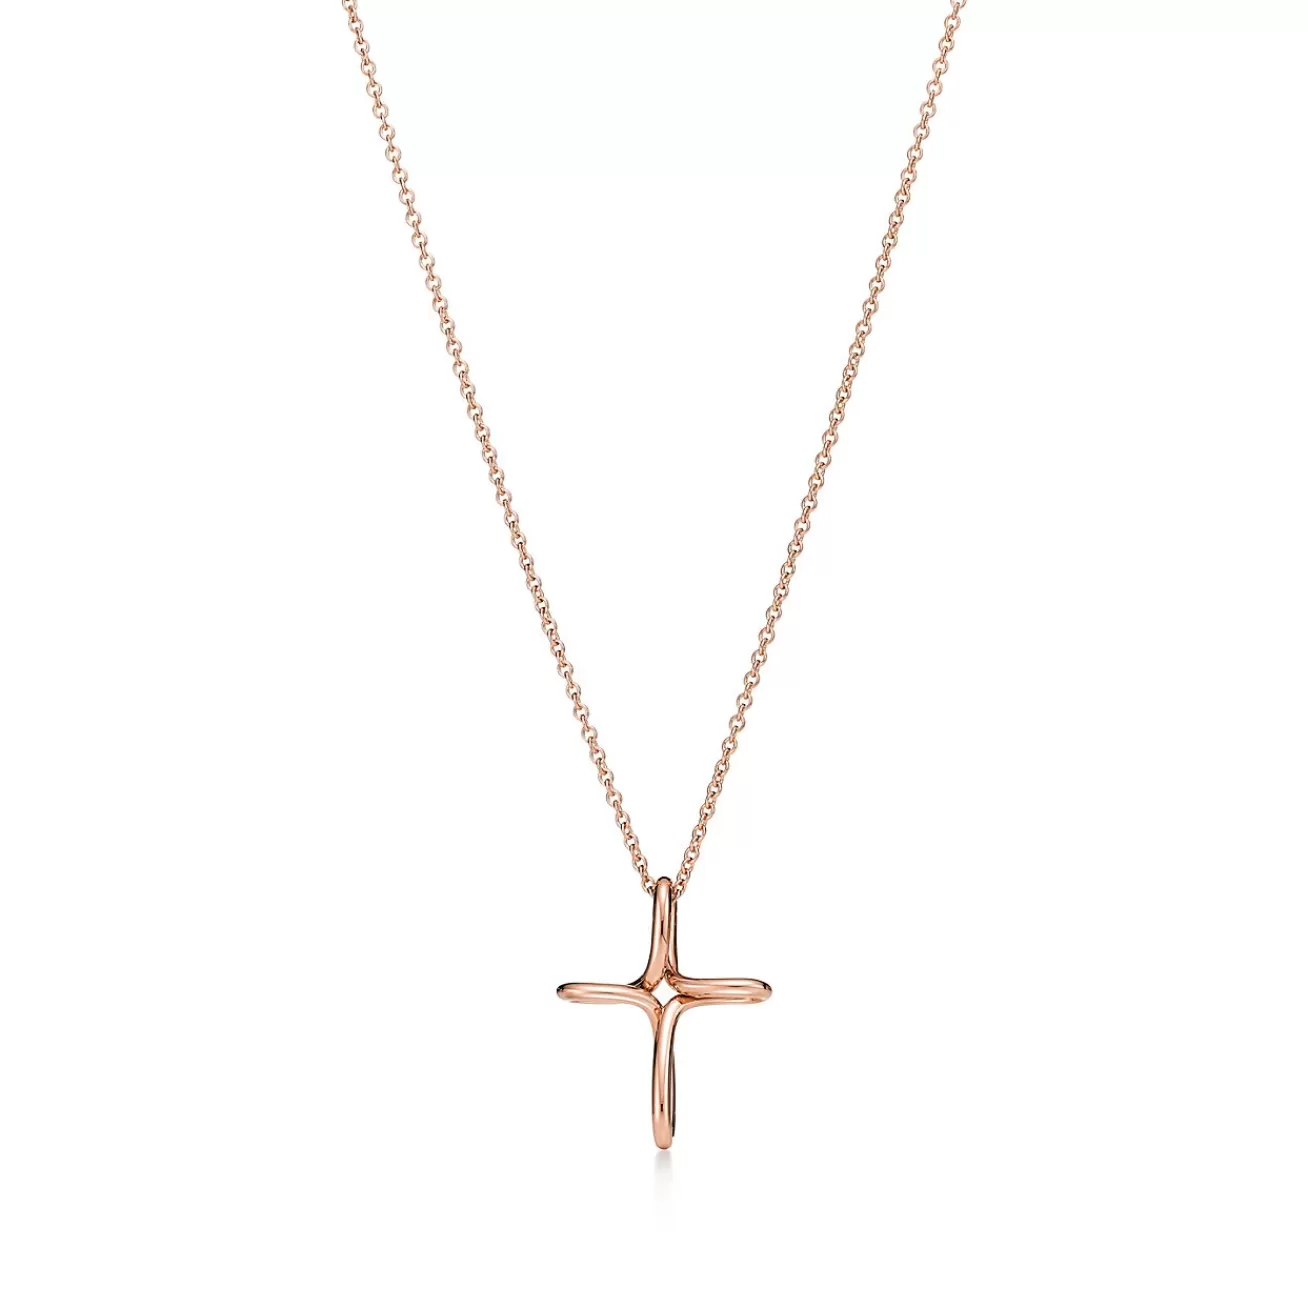 Tiffany & Co. Elsa Peretti® infinity cross pendant in 18k rose gold, small. | ^ Necklaces & Pendants | Rose Gold Jewelry